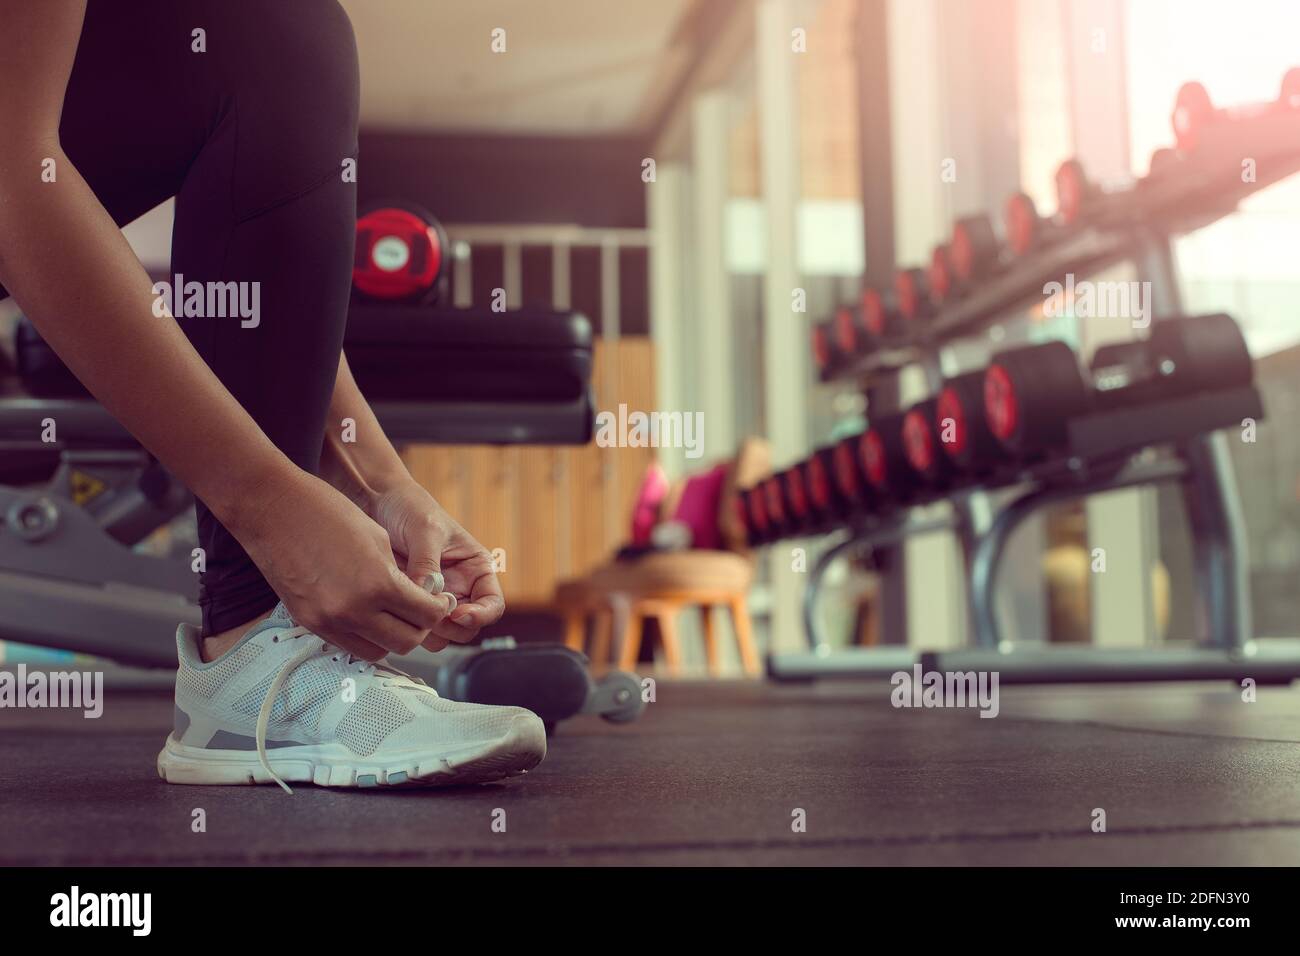 Close up of woman's hands tying shoelaces on sneakers in the gym. Stock Photo